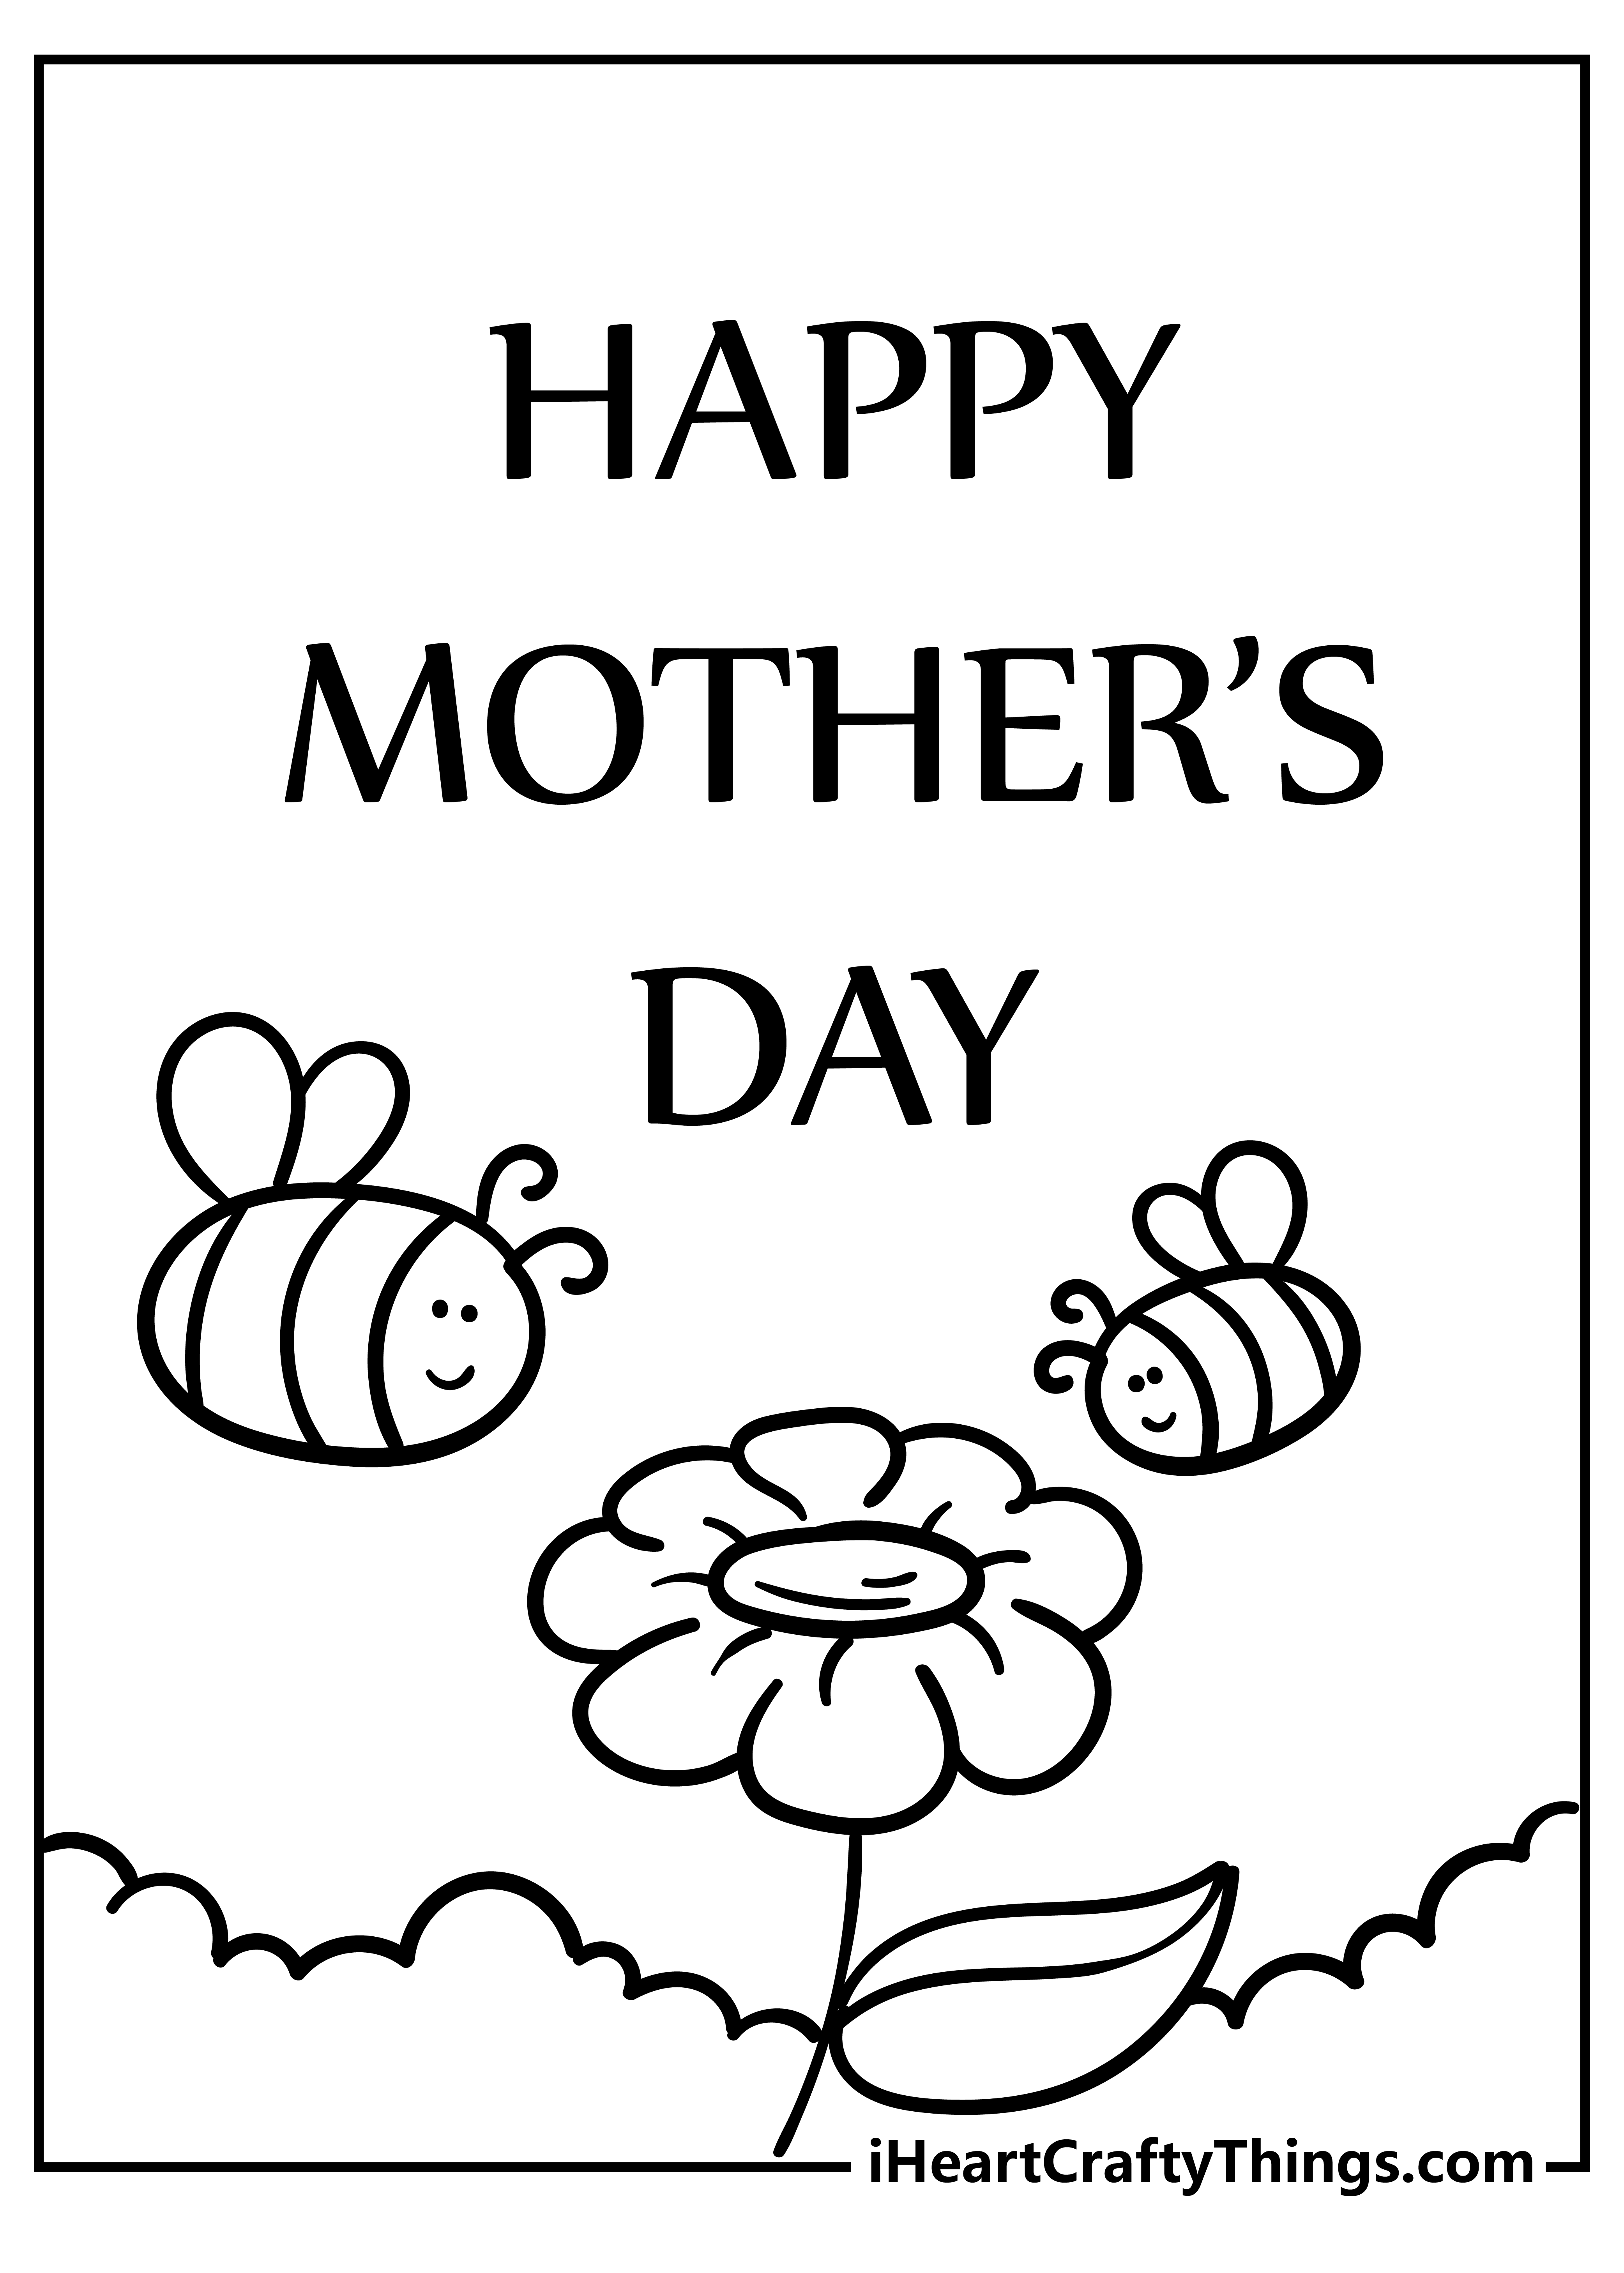 Mother’s Day Coloring Pages free pdf download